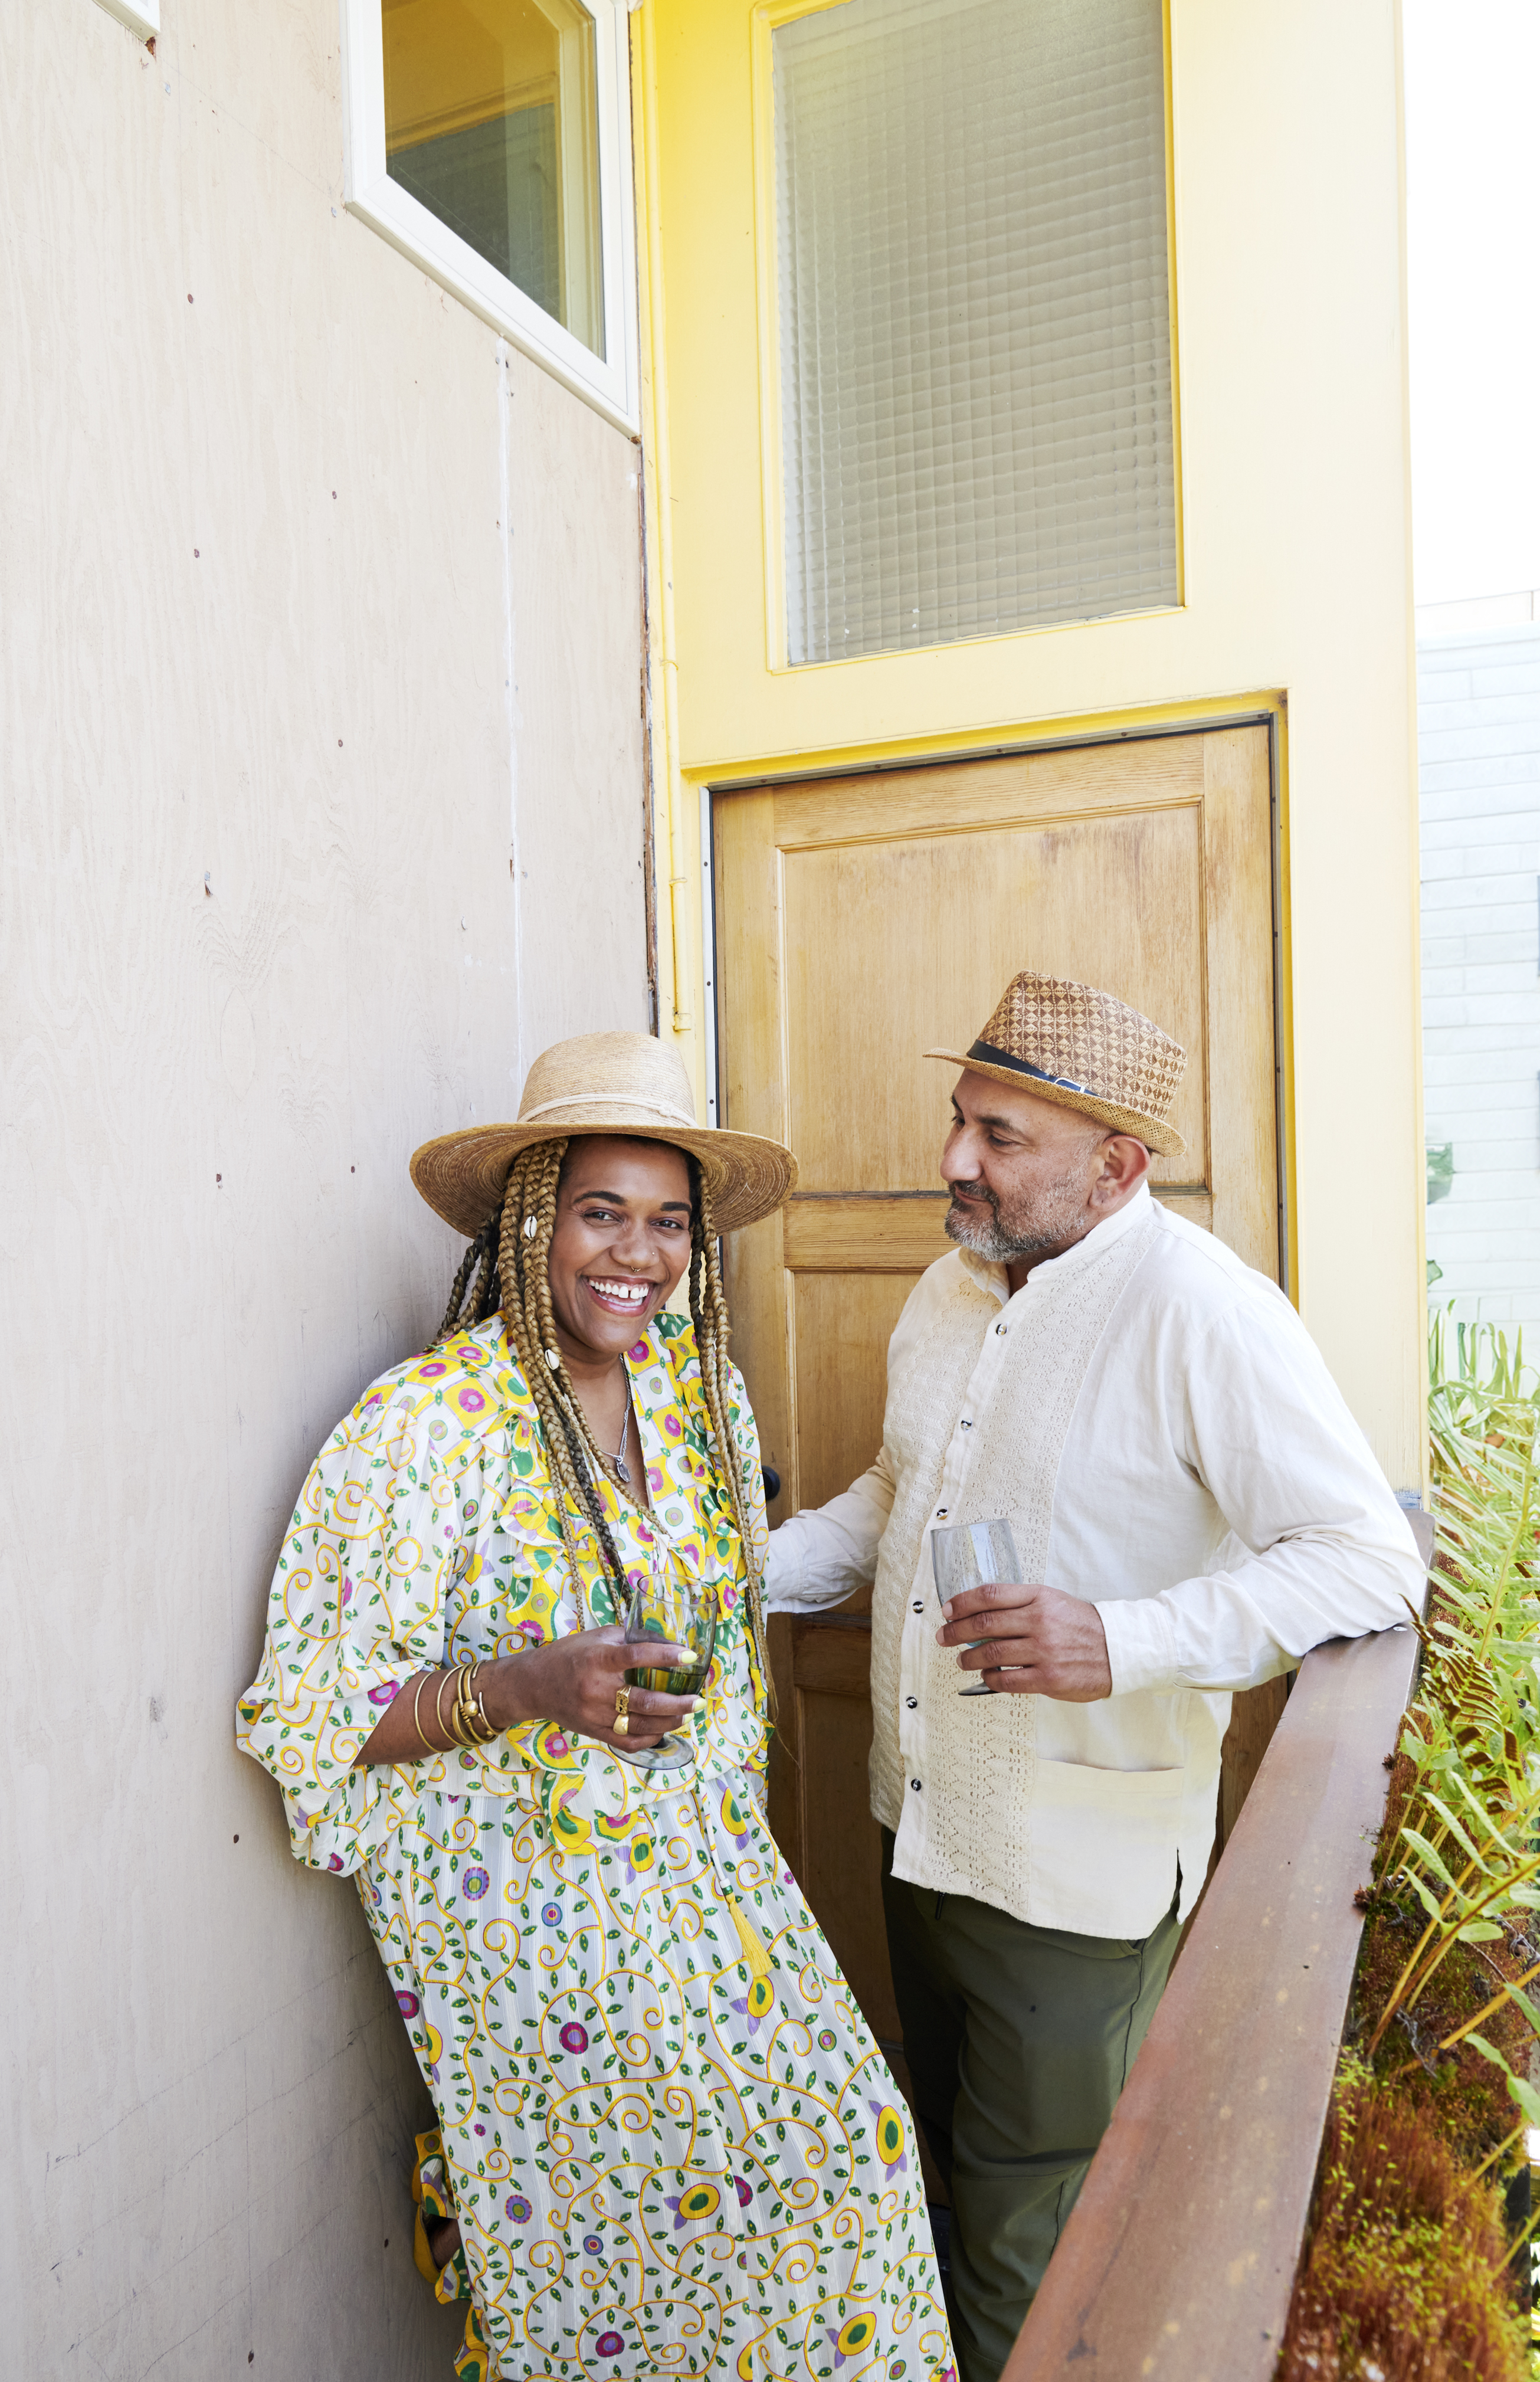 Two people stand outside a door, both holding drinks. One wears a colorful dress and straw hat, while the other is in a white shirt and hat, smiling and chatting.